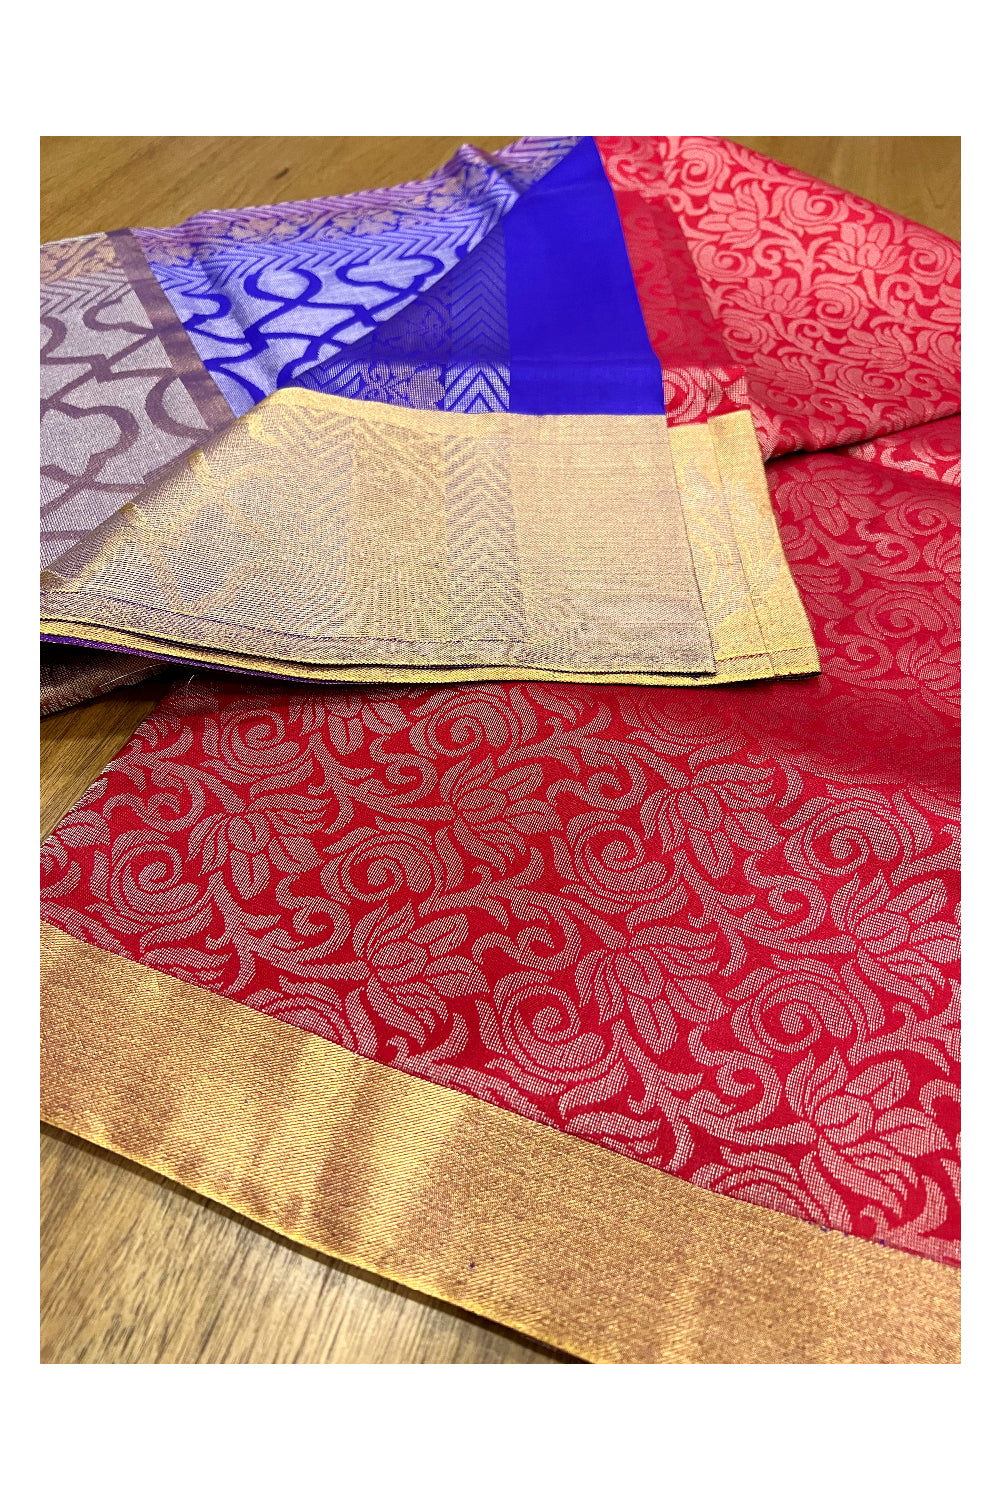 Southloom Handloom Pure Silk Kanchipuram Saree with Floral Work on Red Body and Violet Blouse Piece